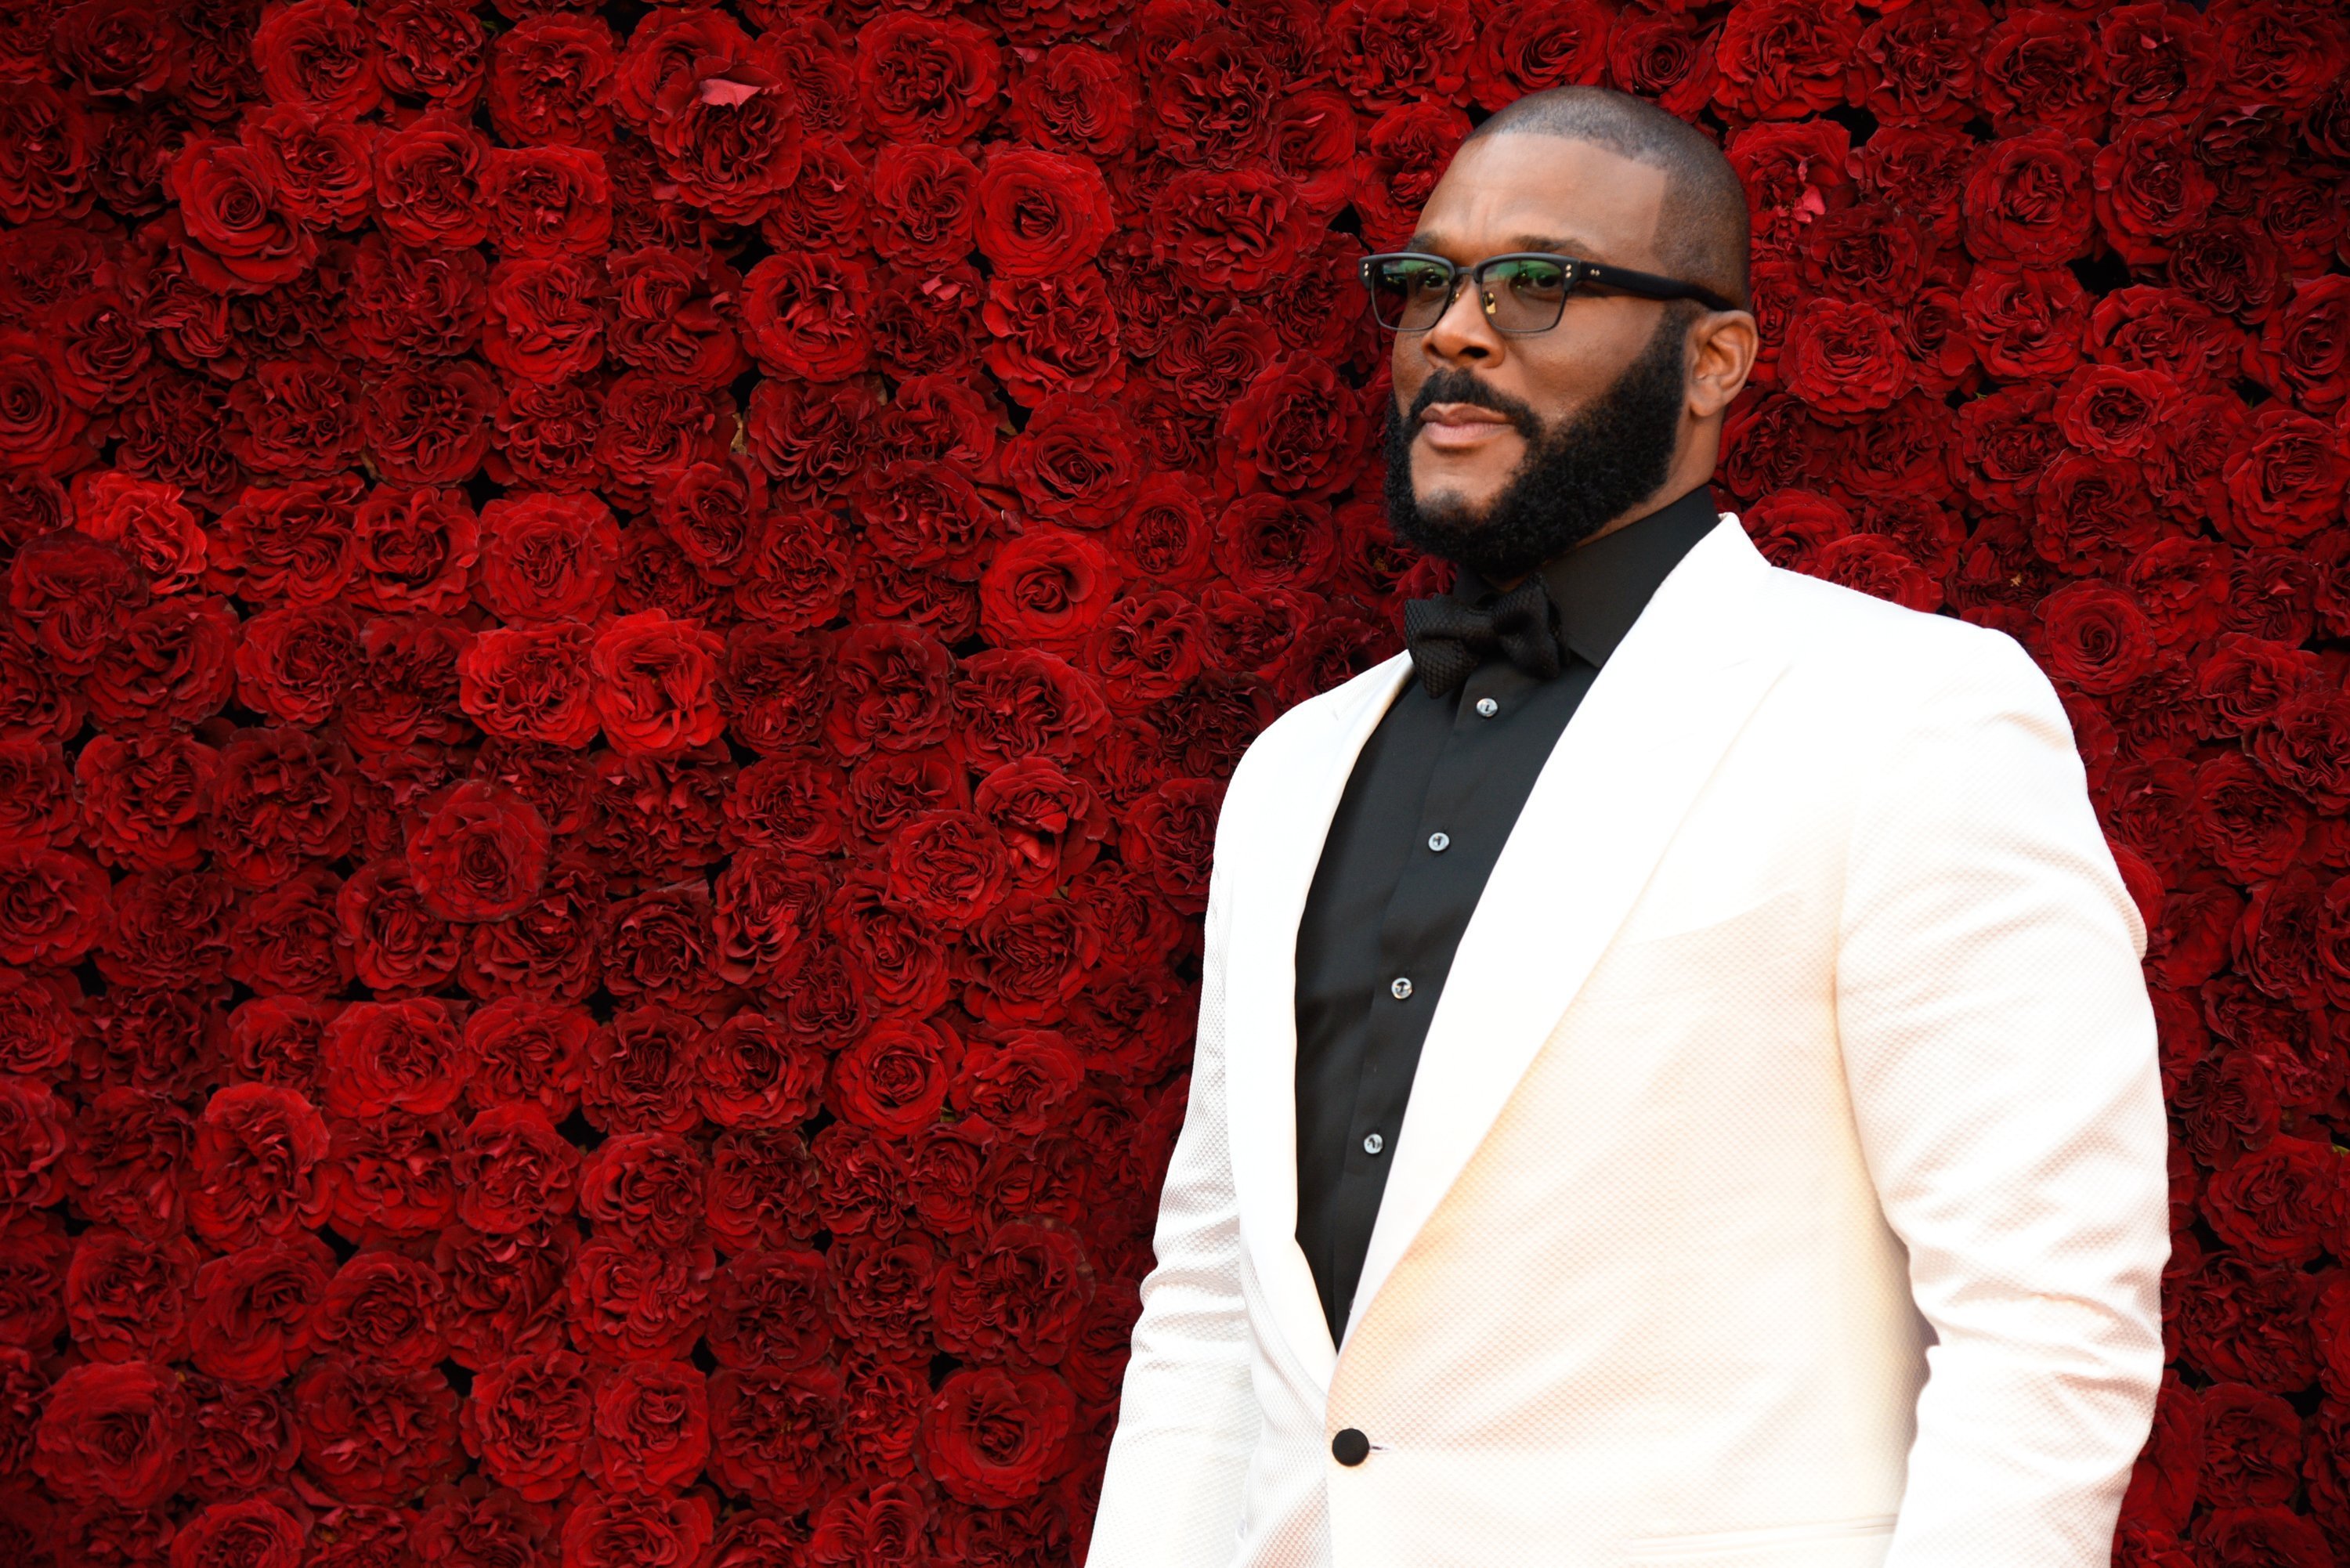  Tyler Perry attends Tyler Perry Studios grand opening gala at Tyler Perry Studios on October 05, 2019 | Photo: Getty Images